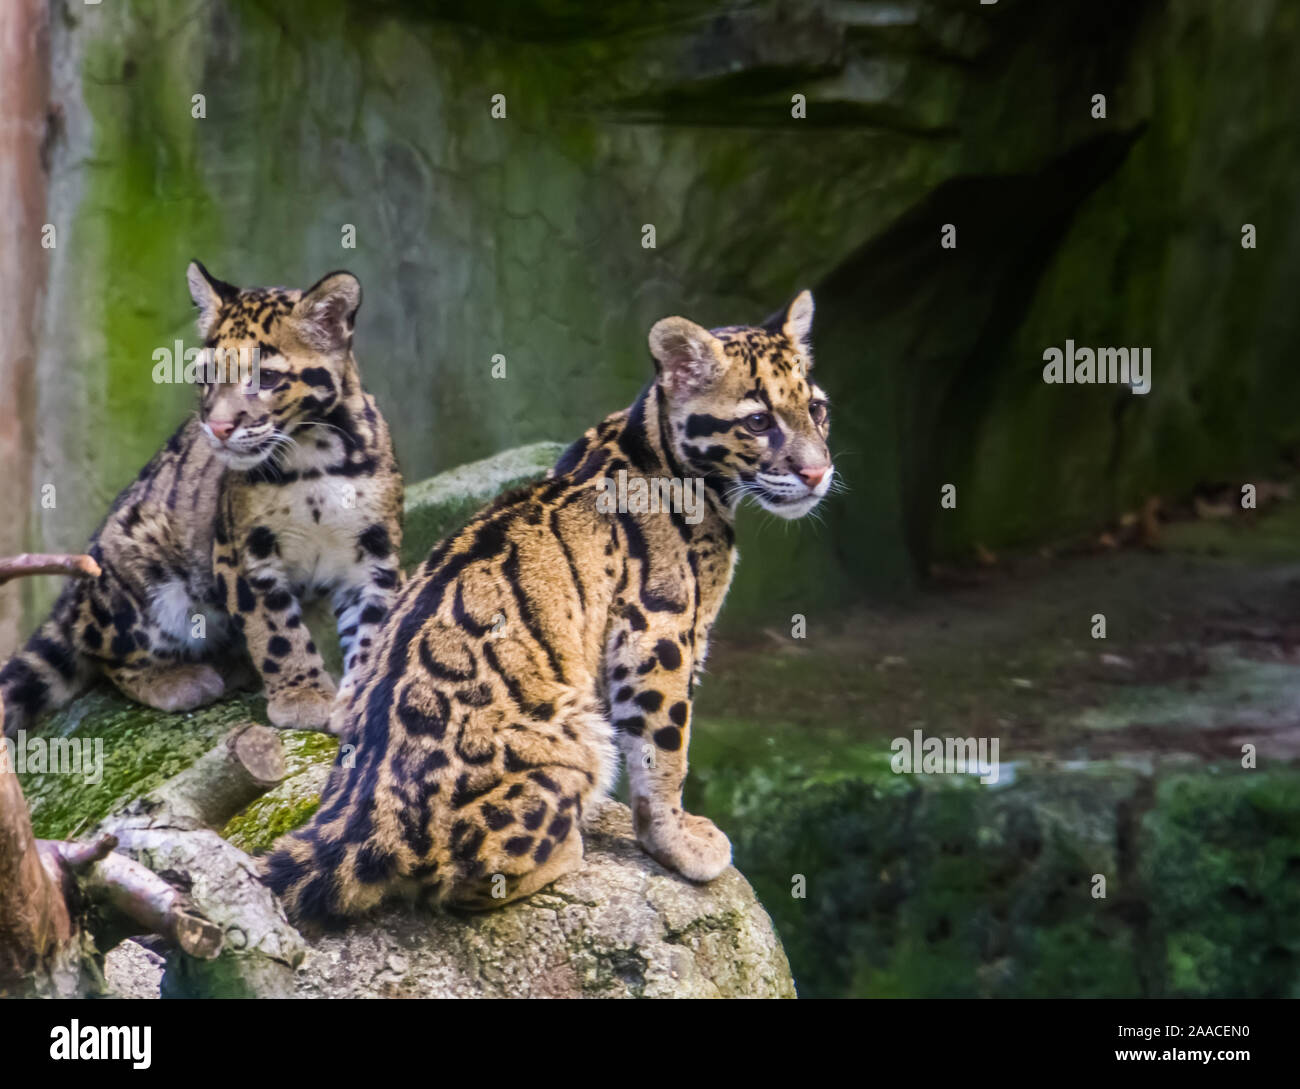 mainland clouded leopard couple sitting together on a rock, tropical wild cat specie from the himalayas of Asia Stock Photo